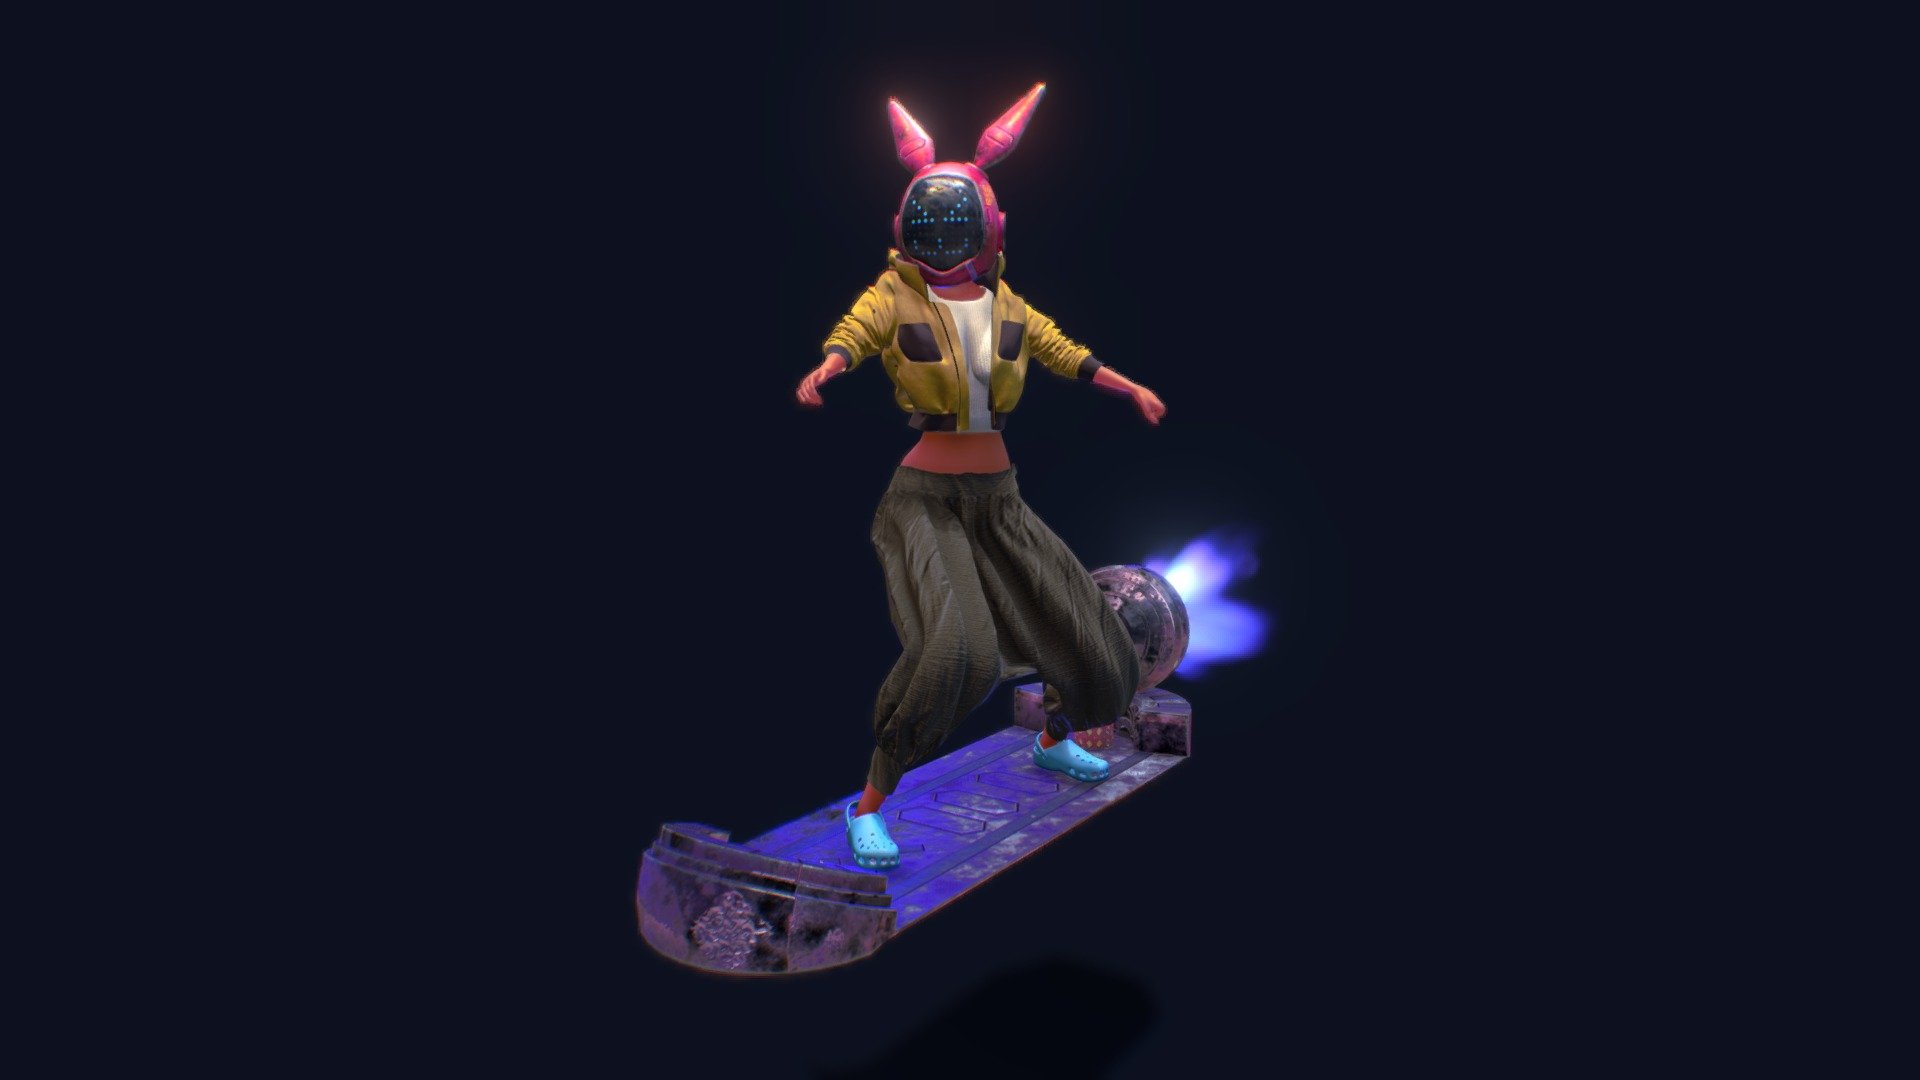 It's a model of a girl with a sci-fi robot bunny head, riding a hoverboard, with a simple loop animation. 

Hope you like it 3d model